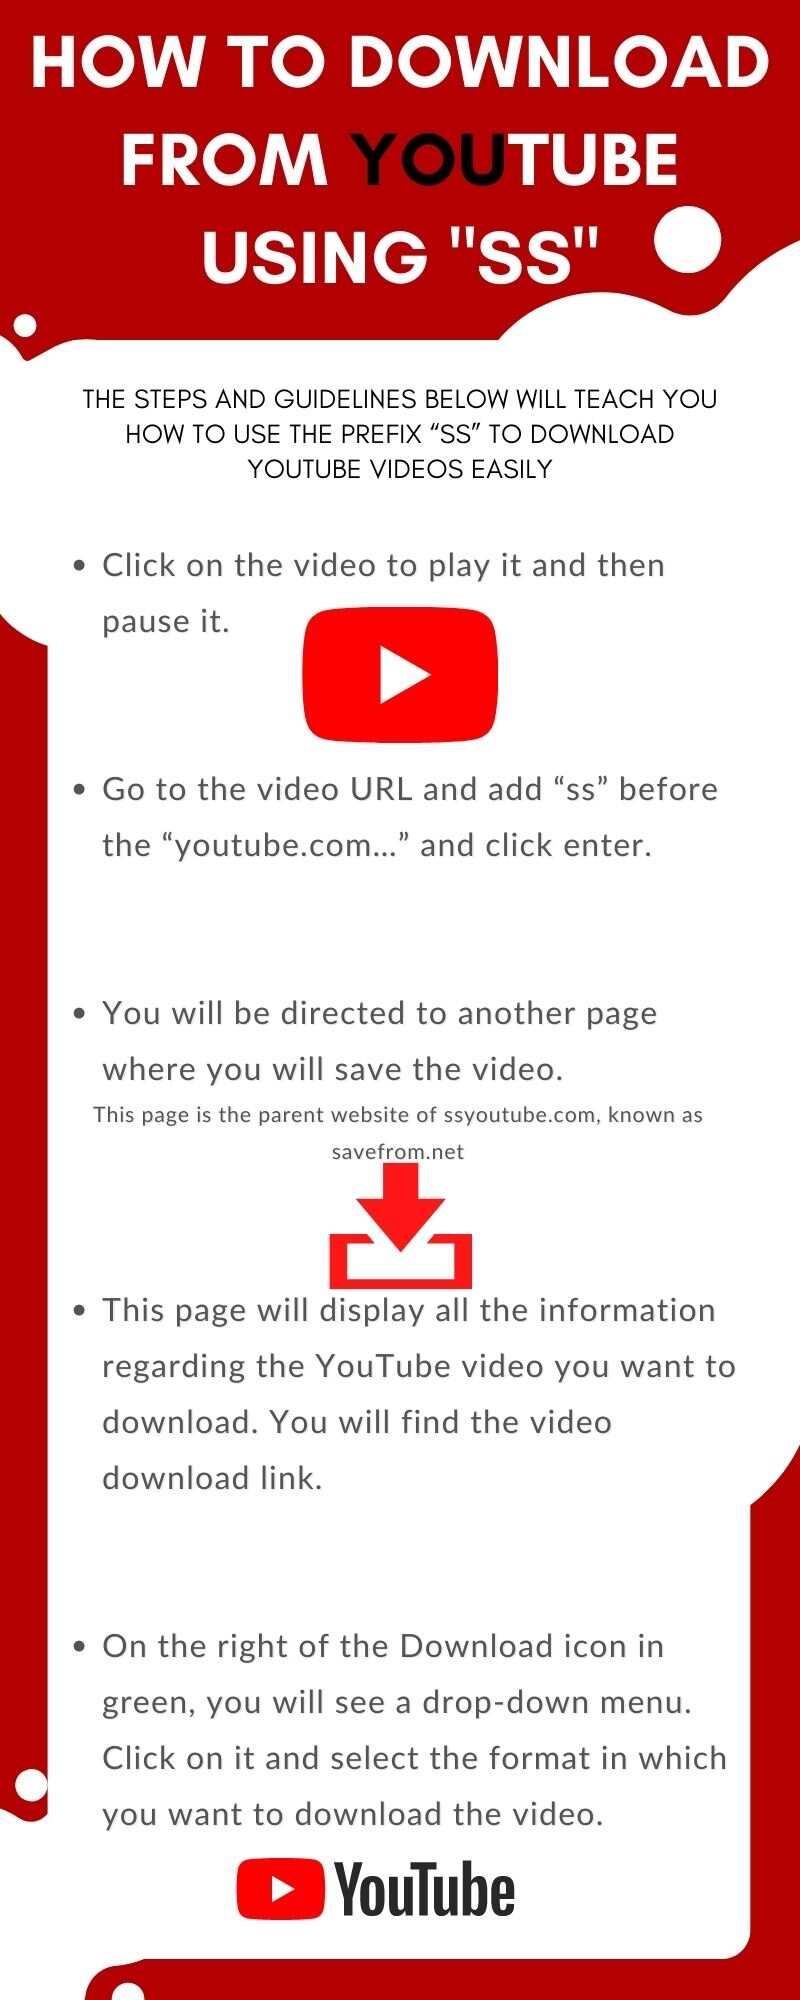 How to from YouTube using SS (step-by-step guide) -